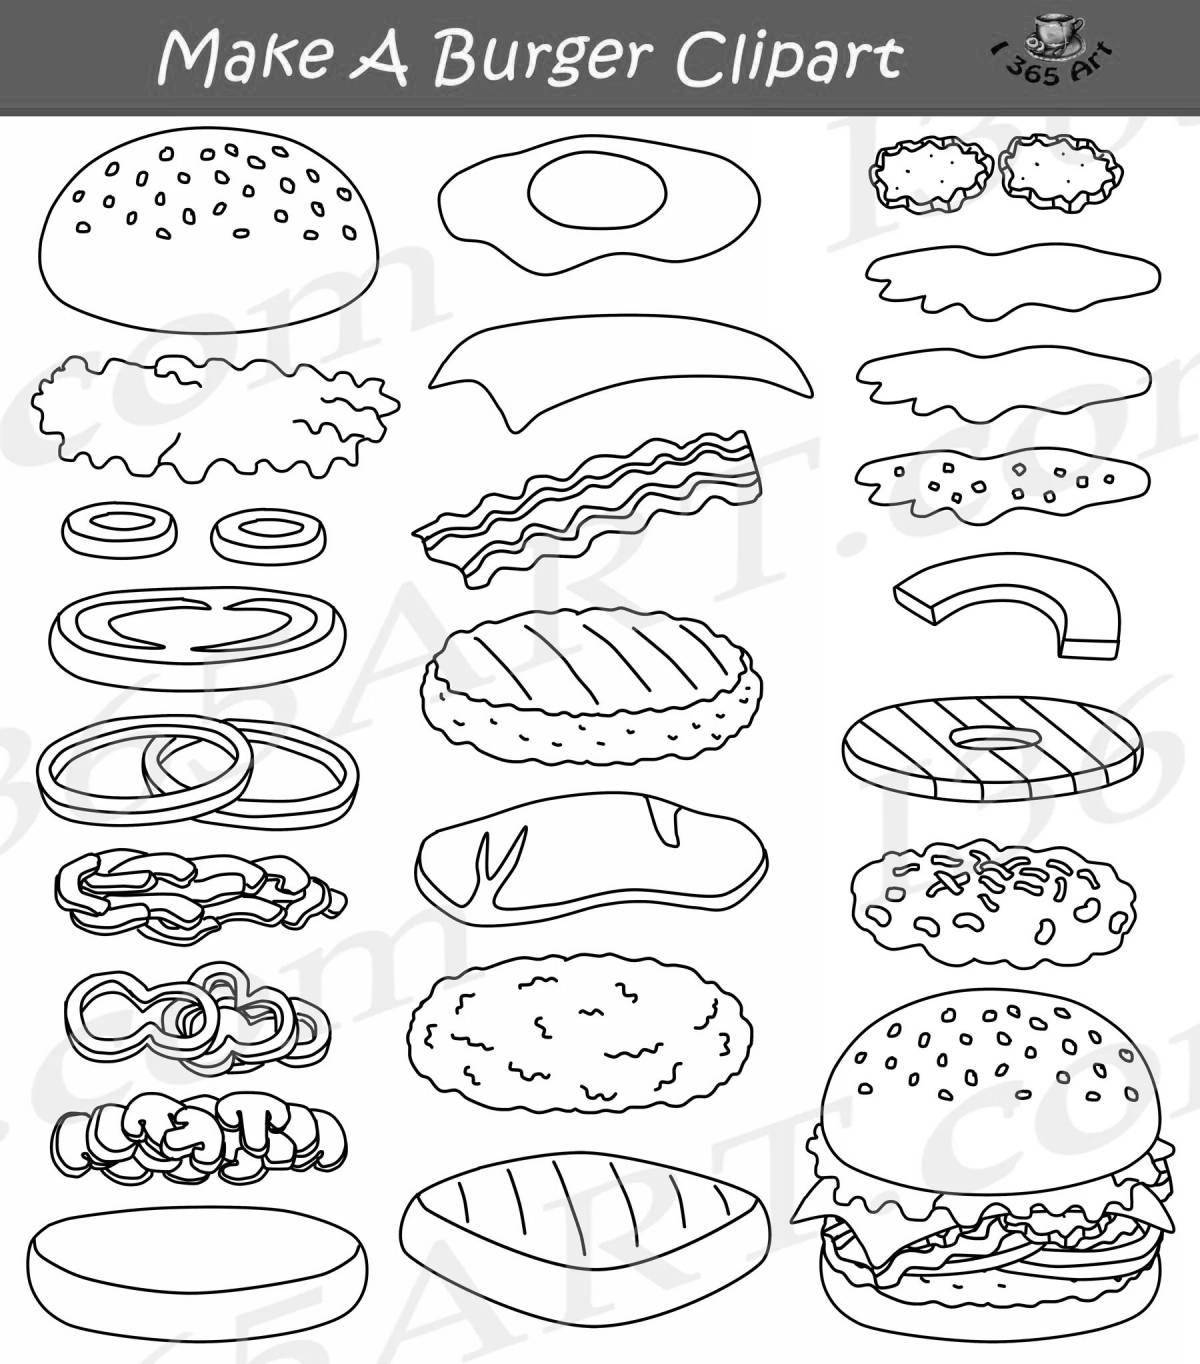 Gorgeous boxy boo burger coloring page